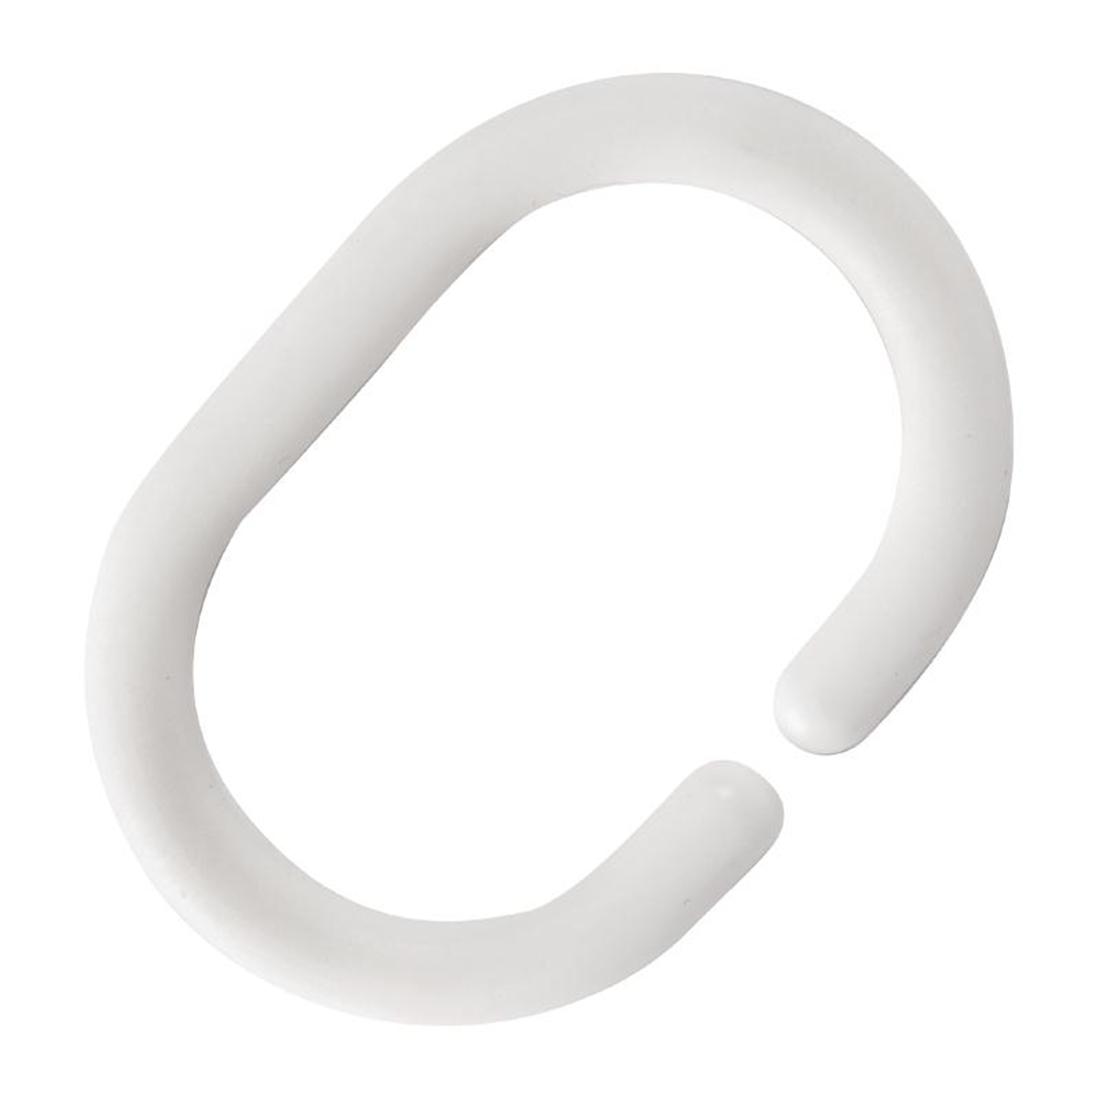 Mitre Essentials May Plastic Shower Curtain Ring